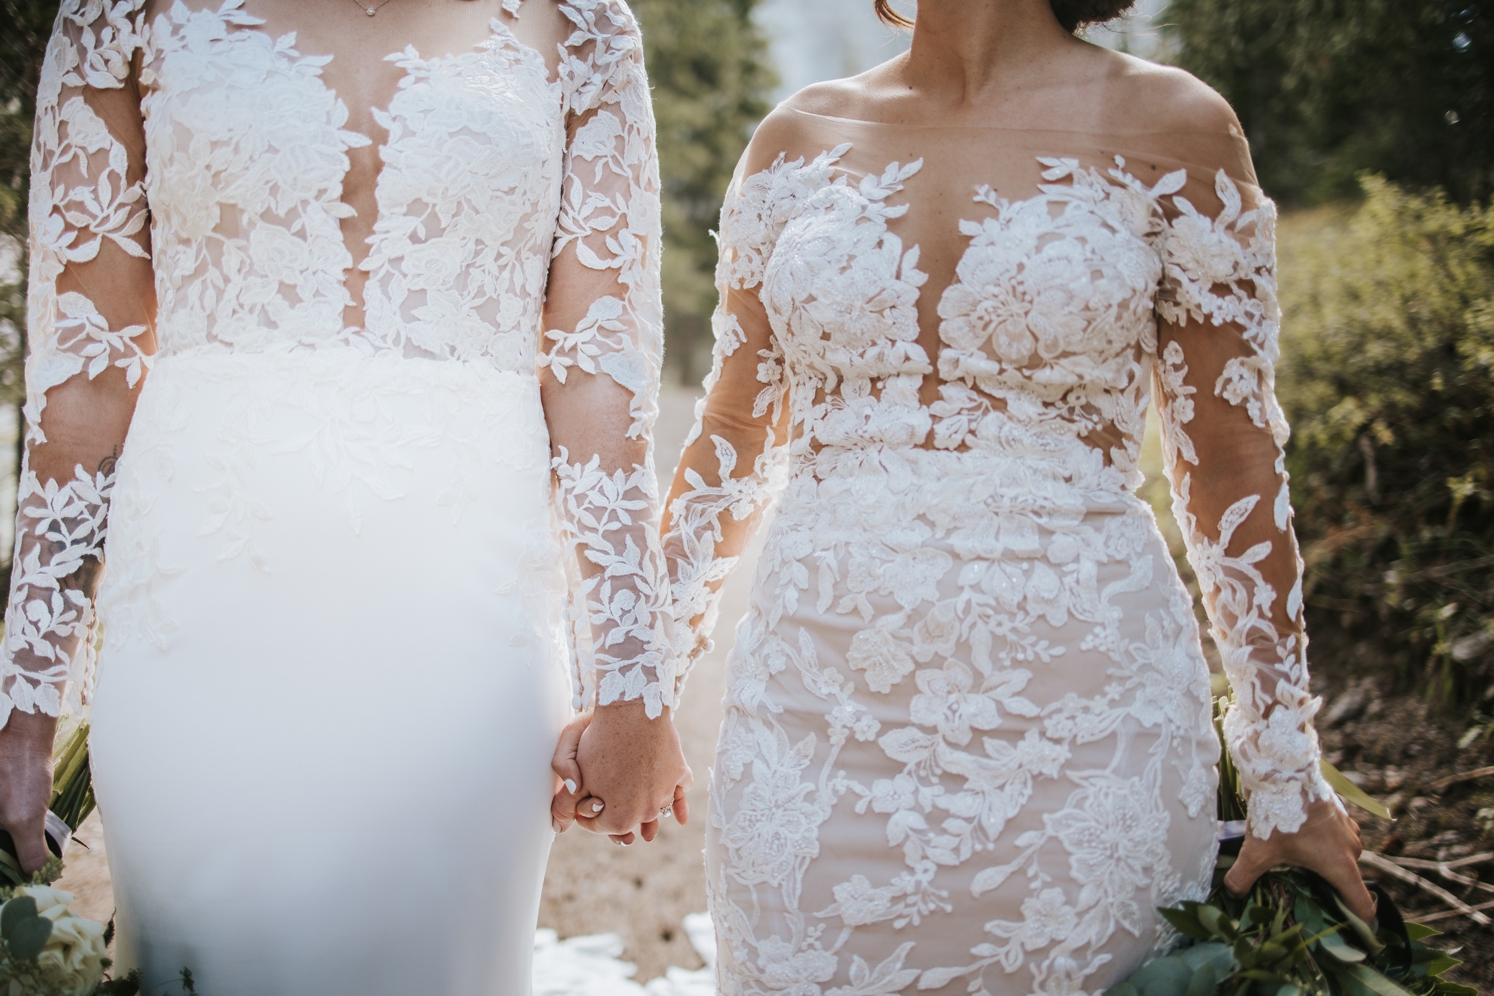 Brides wearing lace gowns holding hands and walking | McArthur Weddings and Events